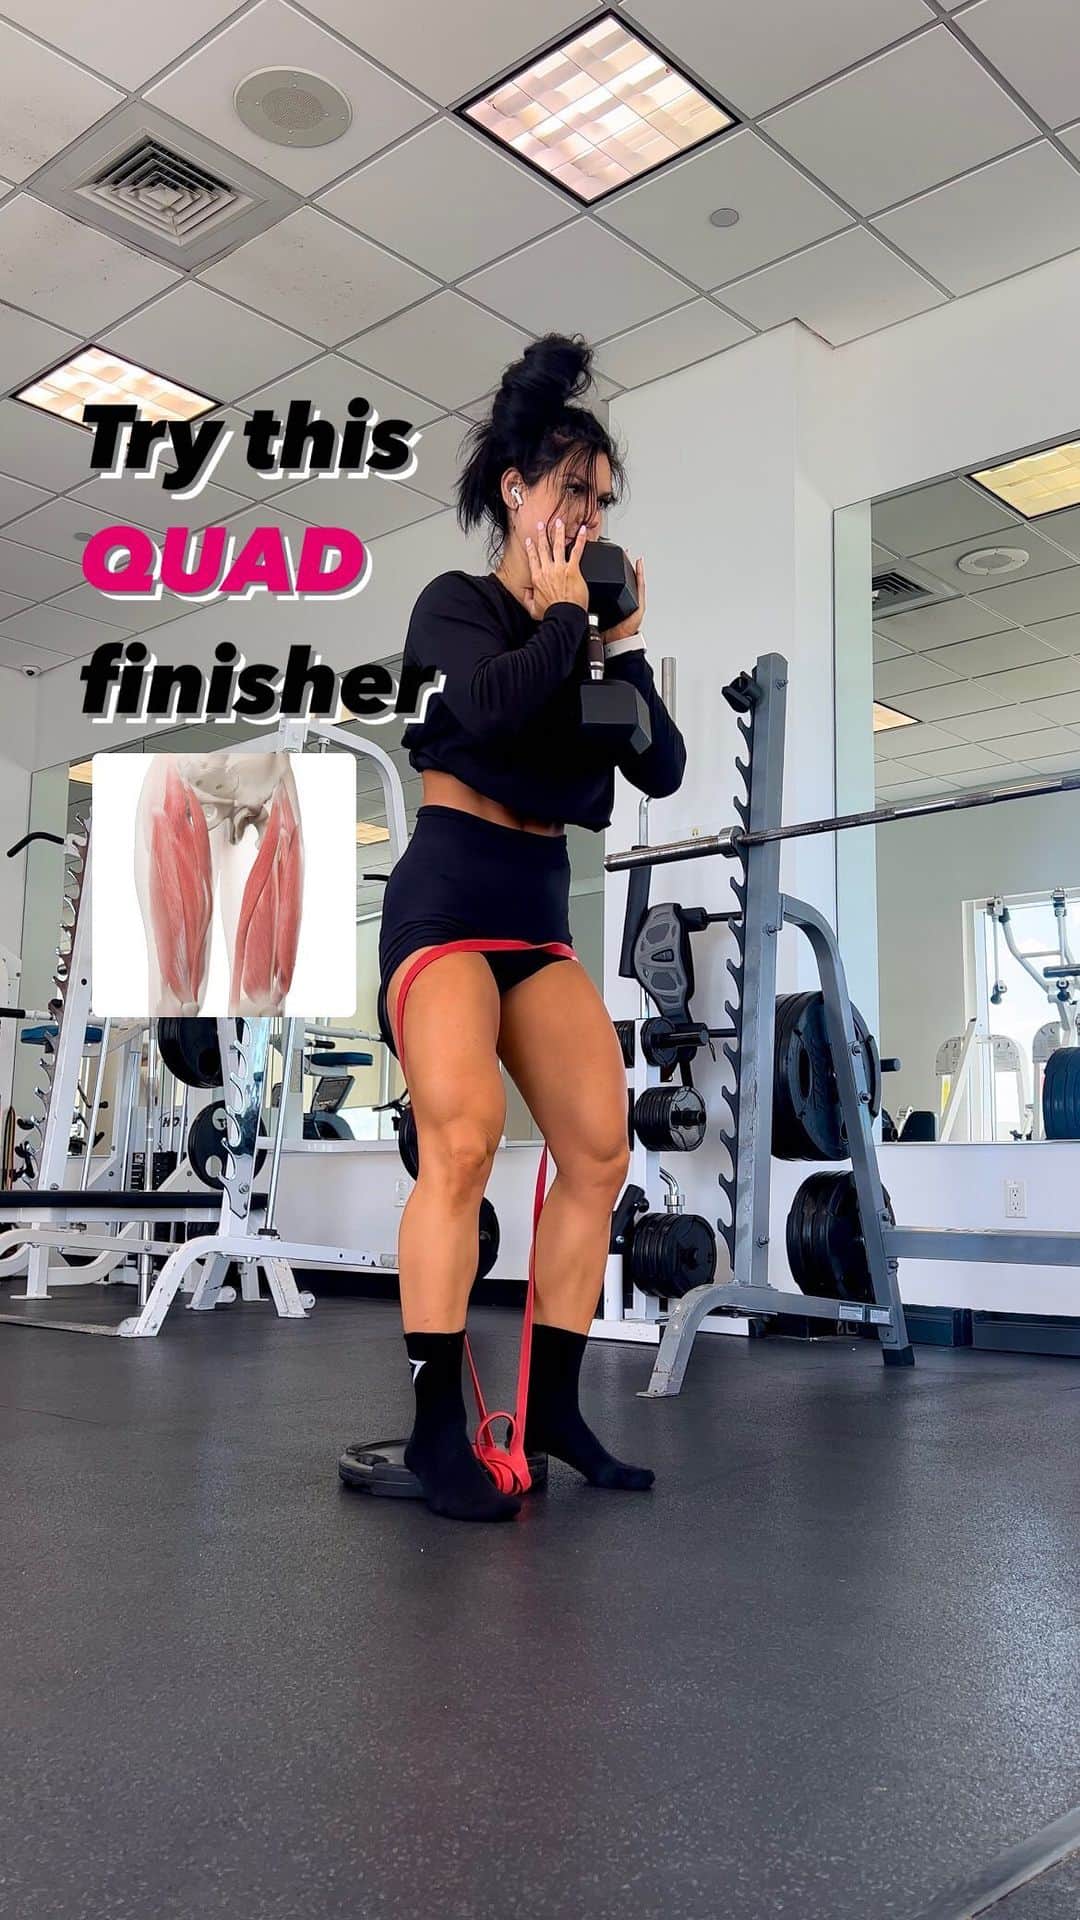 Squatsのインスタグラム：「MORE FITNESS TIPS 👉🏼 @ANITA_HERBERT  Another “fun” leg day finisher for y’all 😮‍💨 try it & hate me later 😂  ⭐️ 🙋🏻‍♀️ LADIES. Are you tired of the same ol same ol workouts?  If you are ready to REIGNITE your workout mojo Join my 🔥FIRED UP🔥 FitQueen Challenge—and your life will NEVER BE THE SAME! 🔗more info on @anita_herbert」